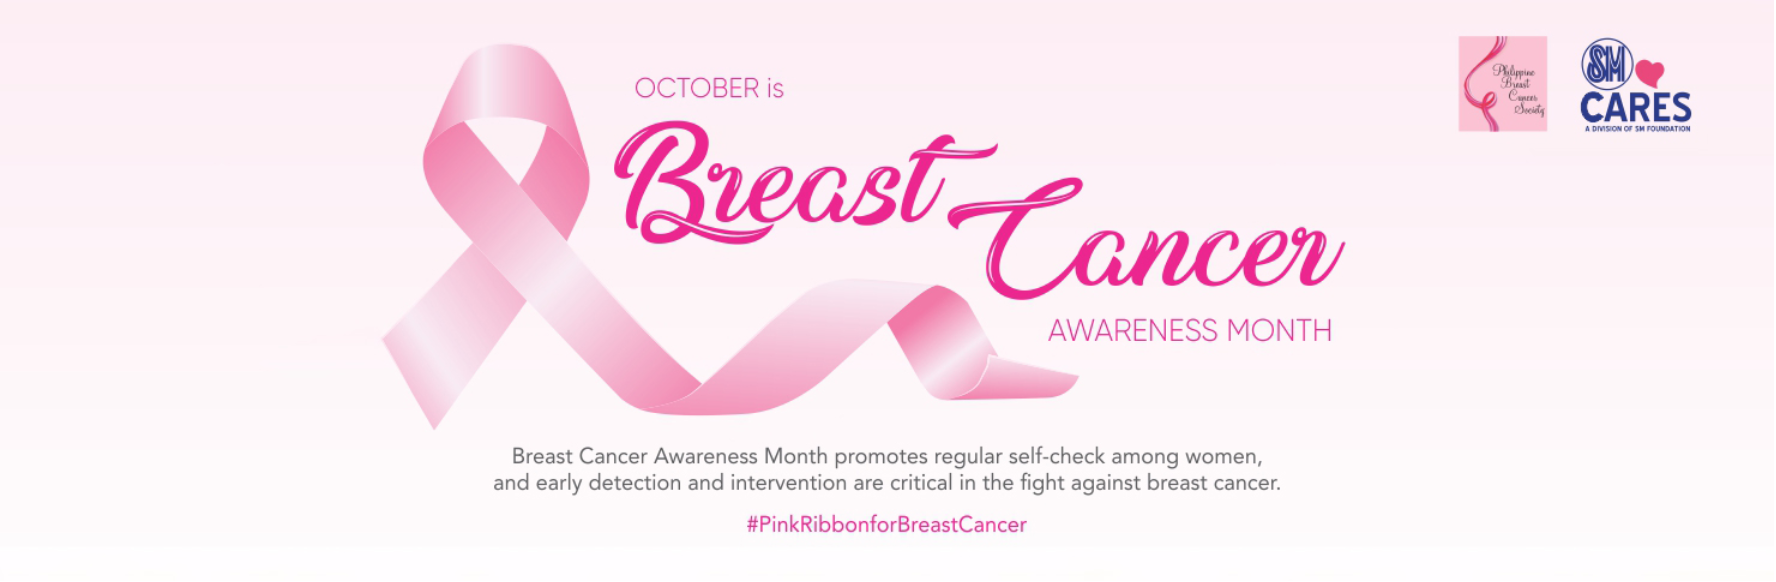 sm-cares-and-philippine-breast-cancer-society-observe-breast-cancer-awareness-month